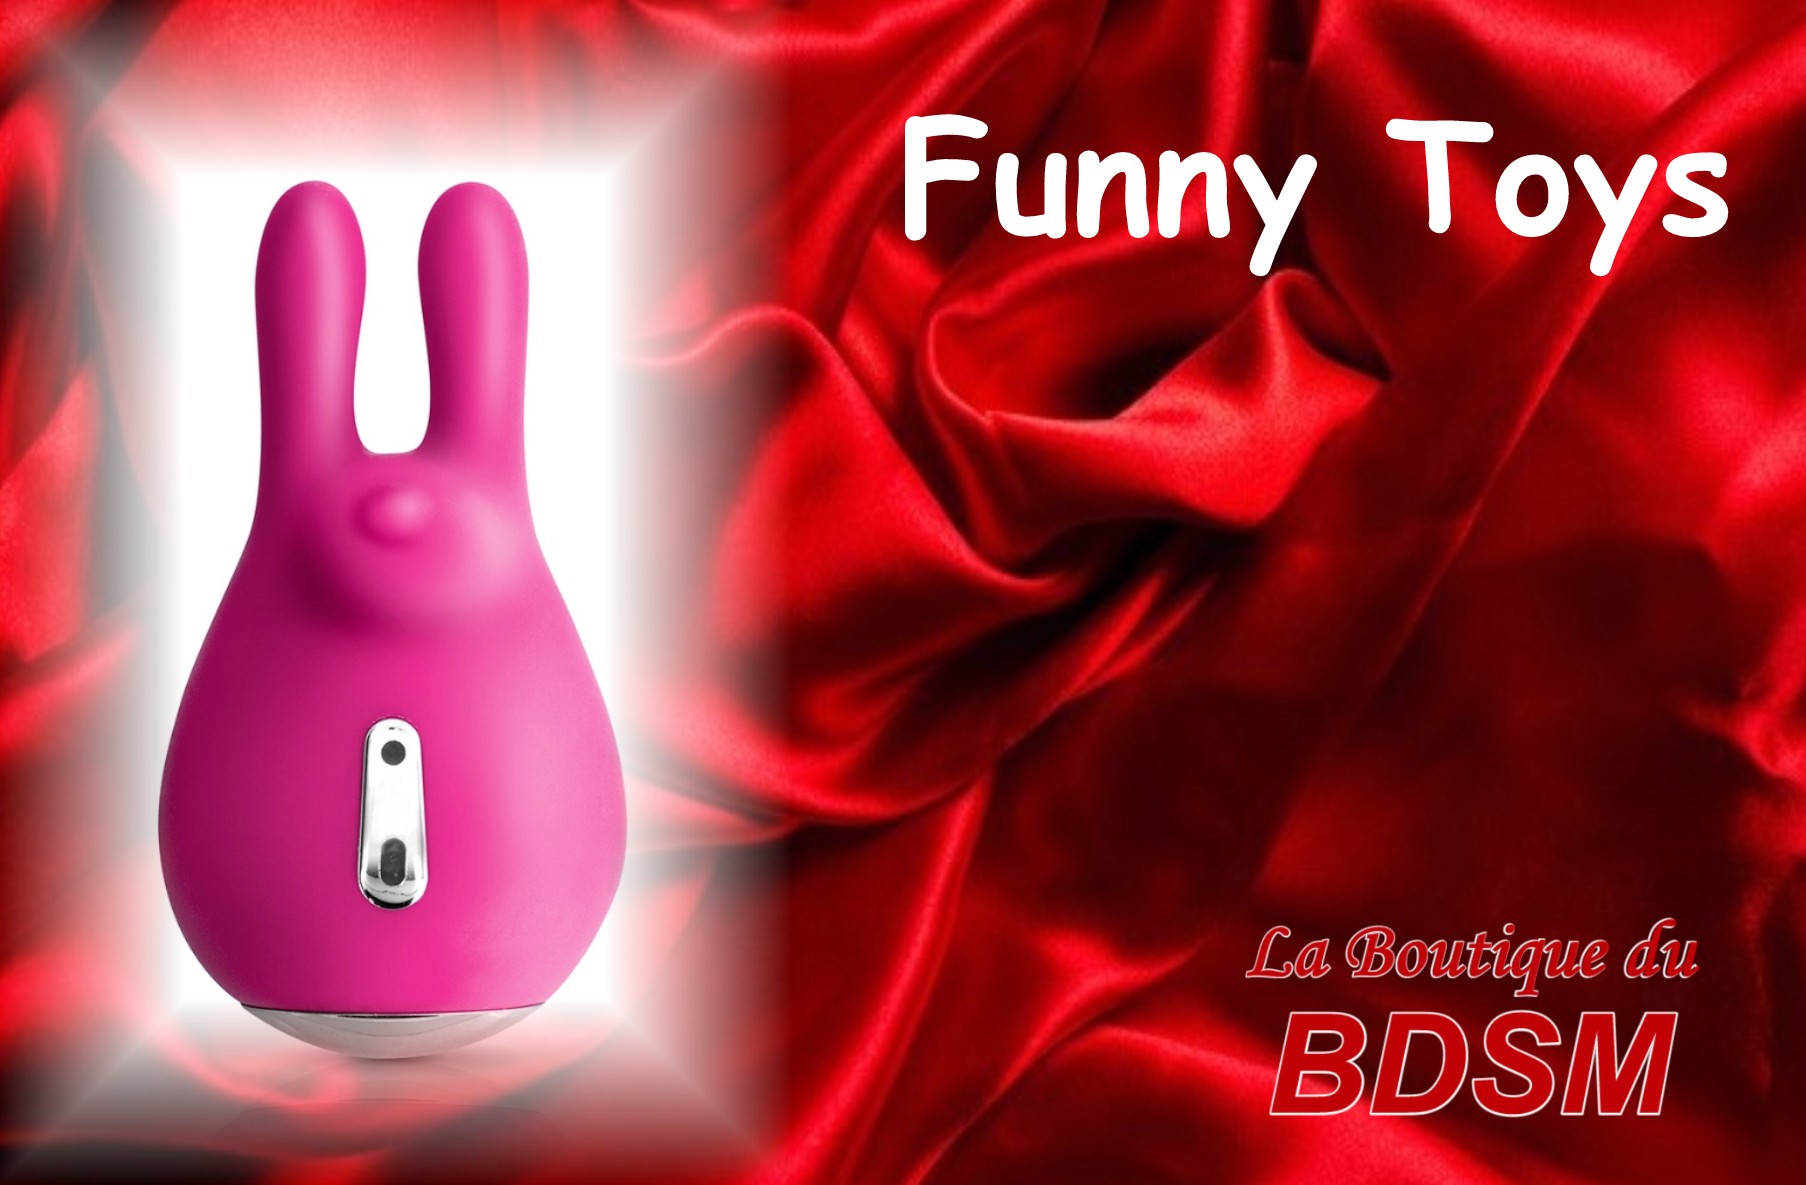 SEXTOYS FUNNY TOYS CHAMPAGNOLLES 17